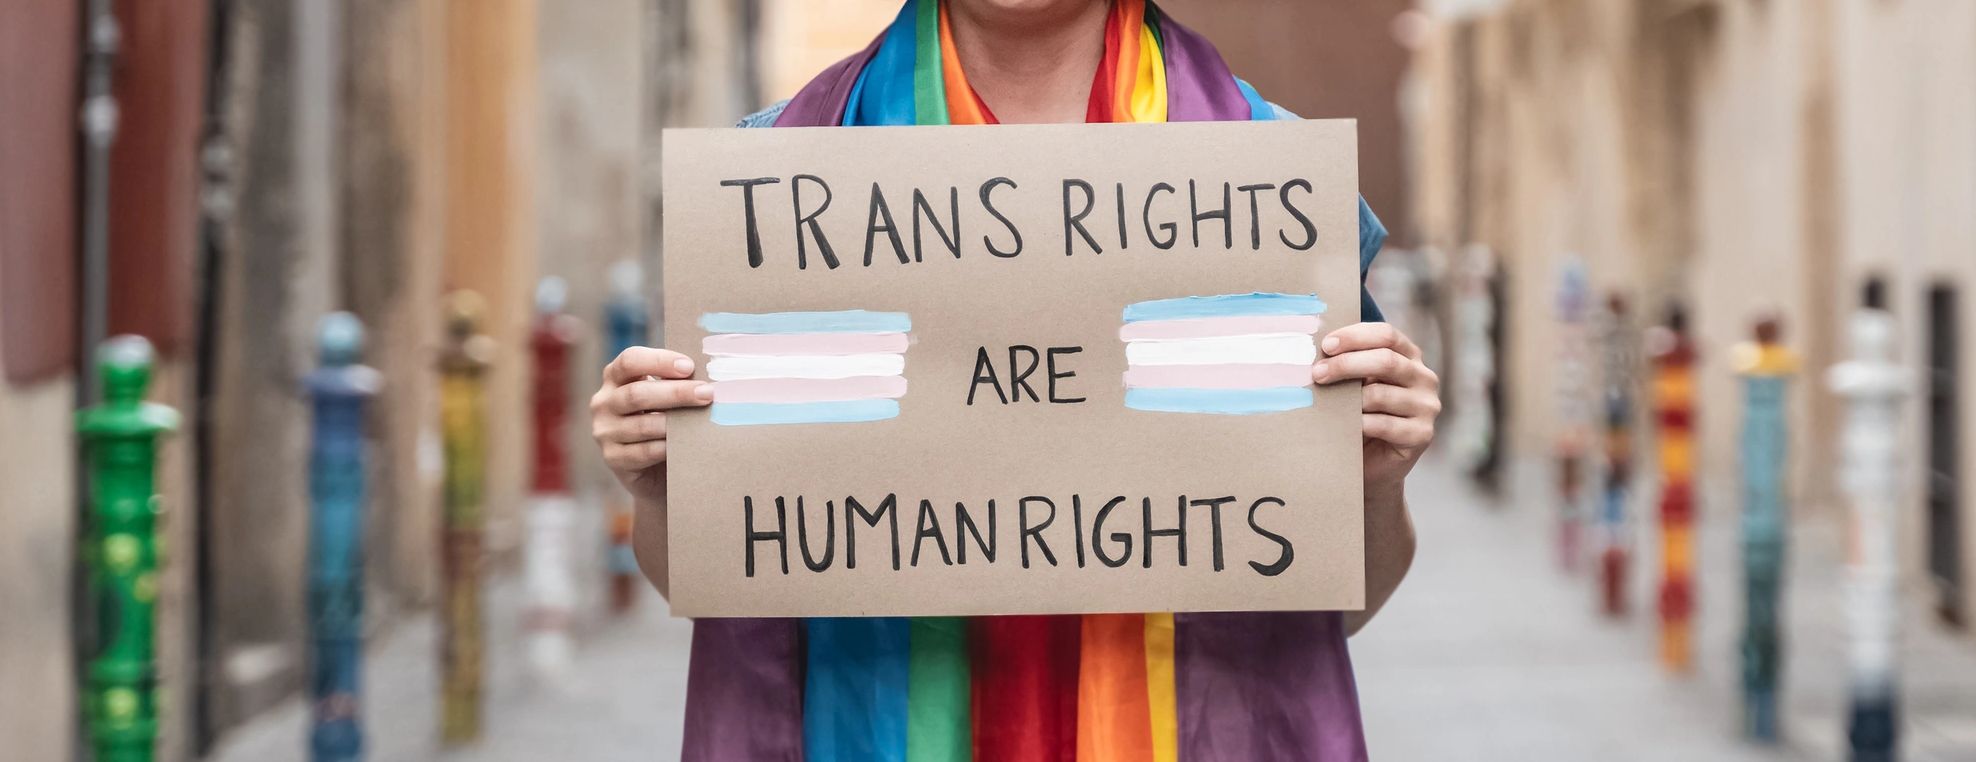 Young person holding a sign that reads "Trans Rights are Human Rights"